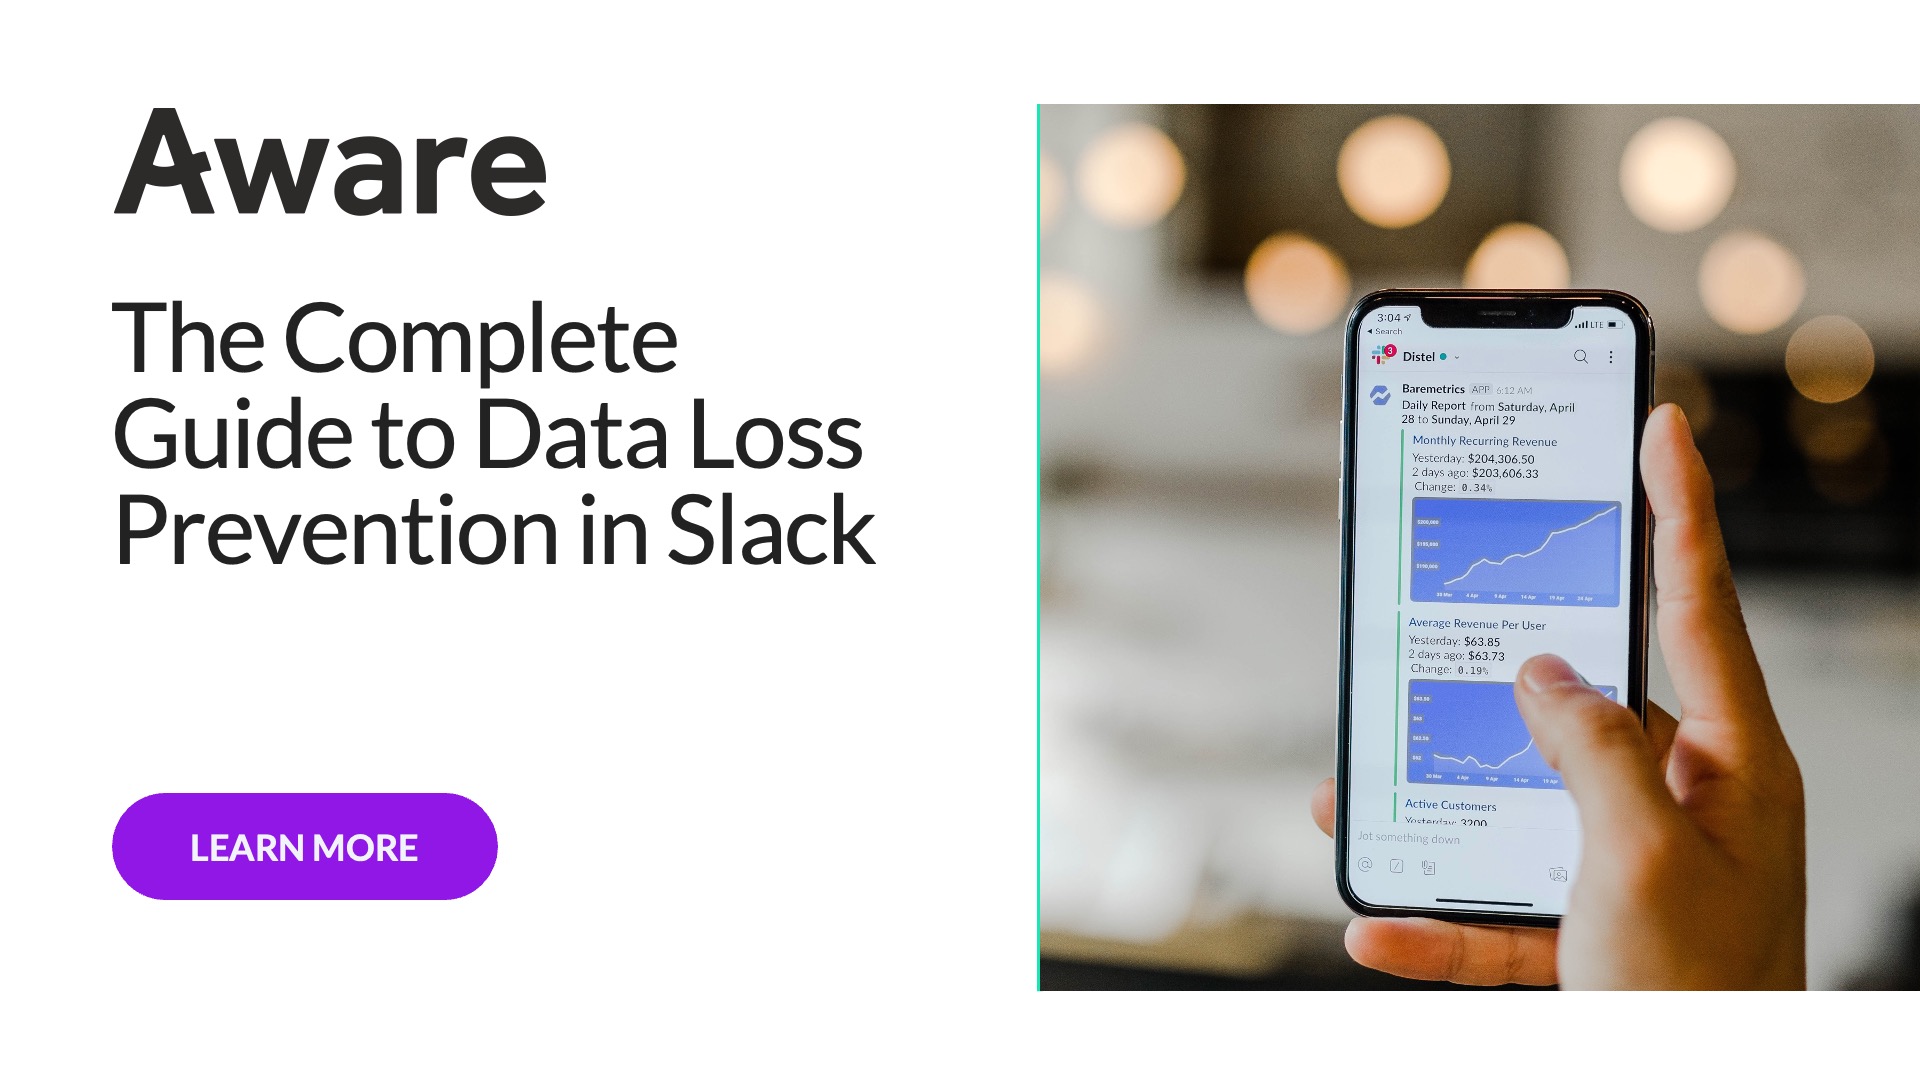 The Complete Guide to Data Loss Prevention in Slack